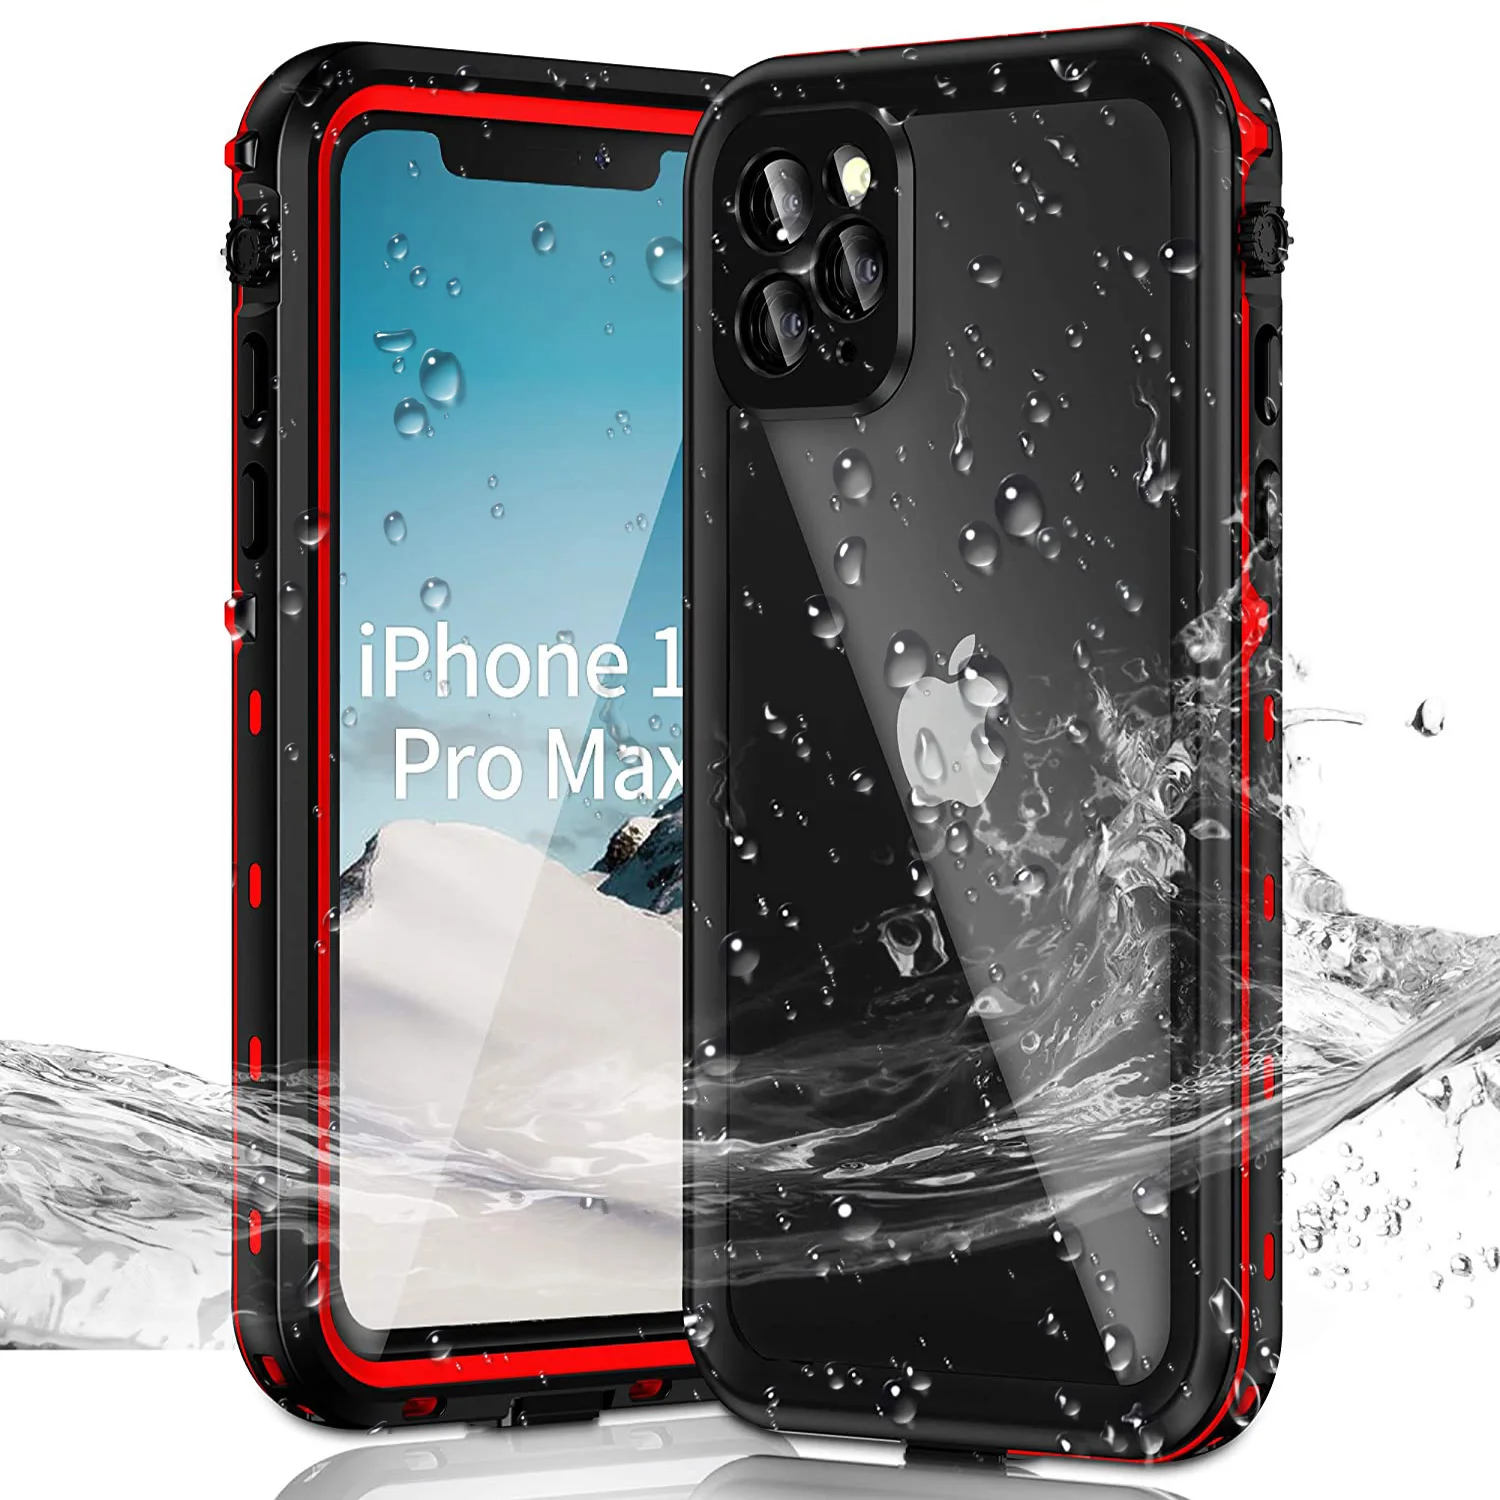 

Waterproof Phone Case for iphone 11 pro max Shockproof, Dustproof Full Body Protection Cover TPU Rugged Bumper Underwater Case